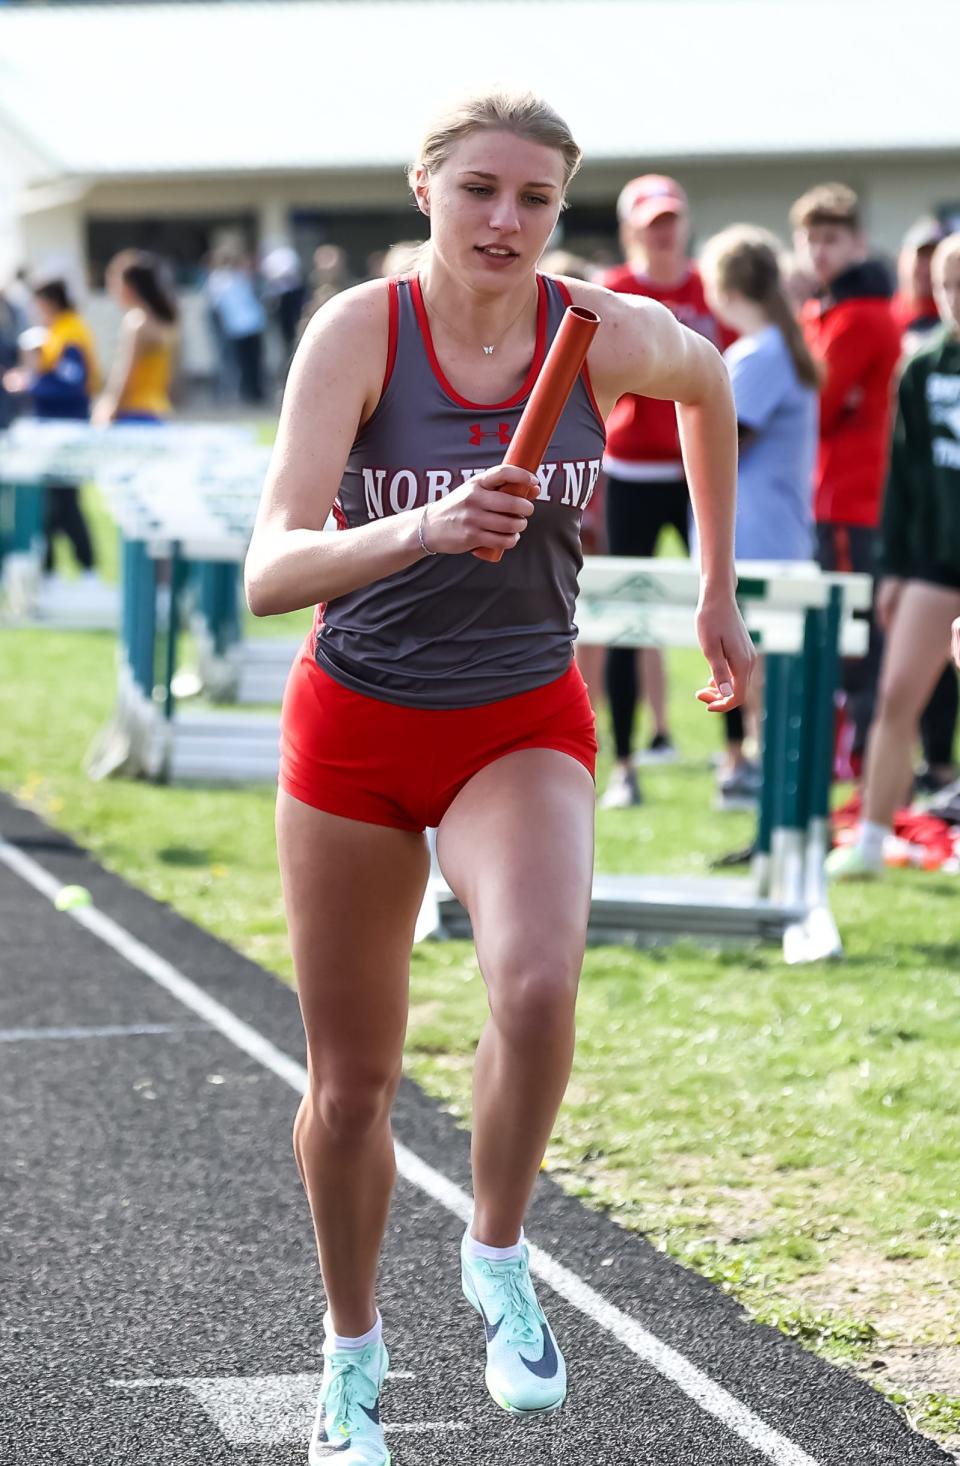 Norwayne's Jaylee Wingate has the area's top reported times in three individual events and as a part of two relays.